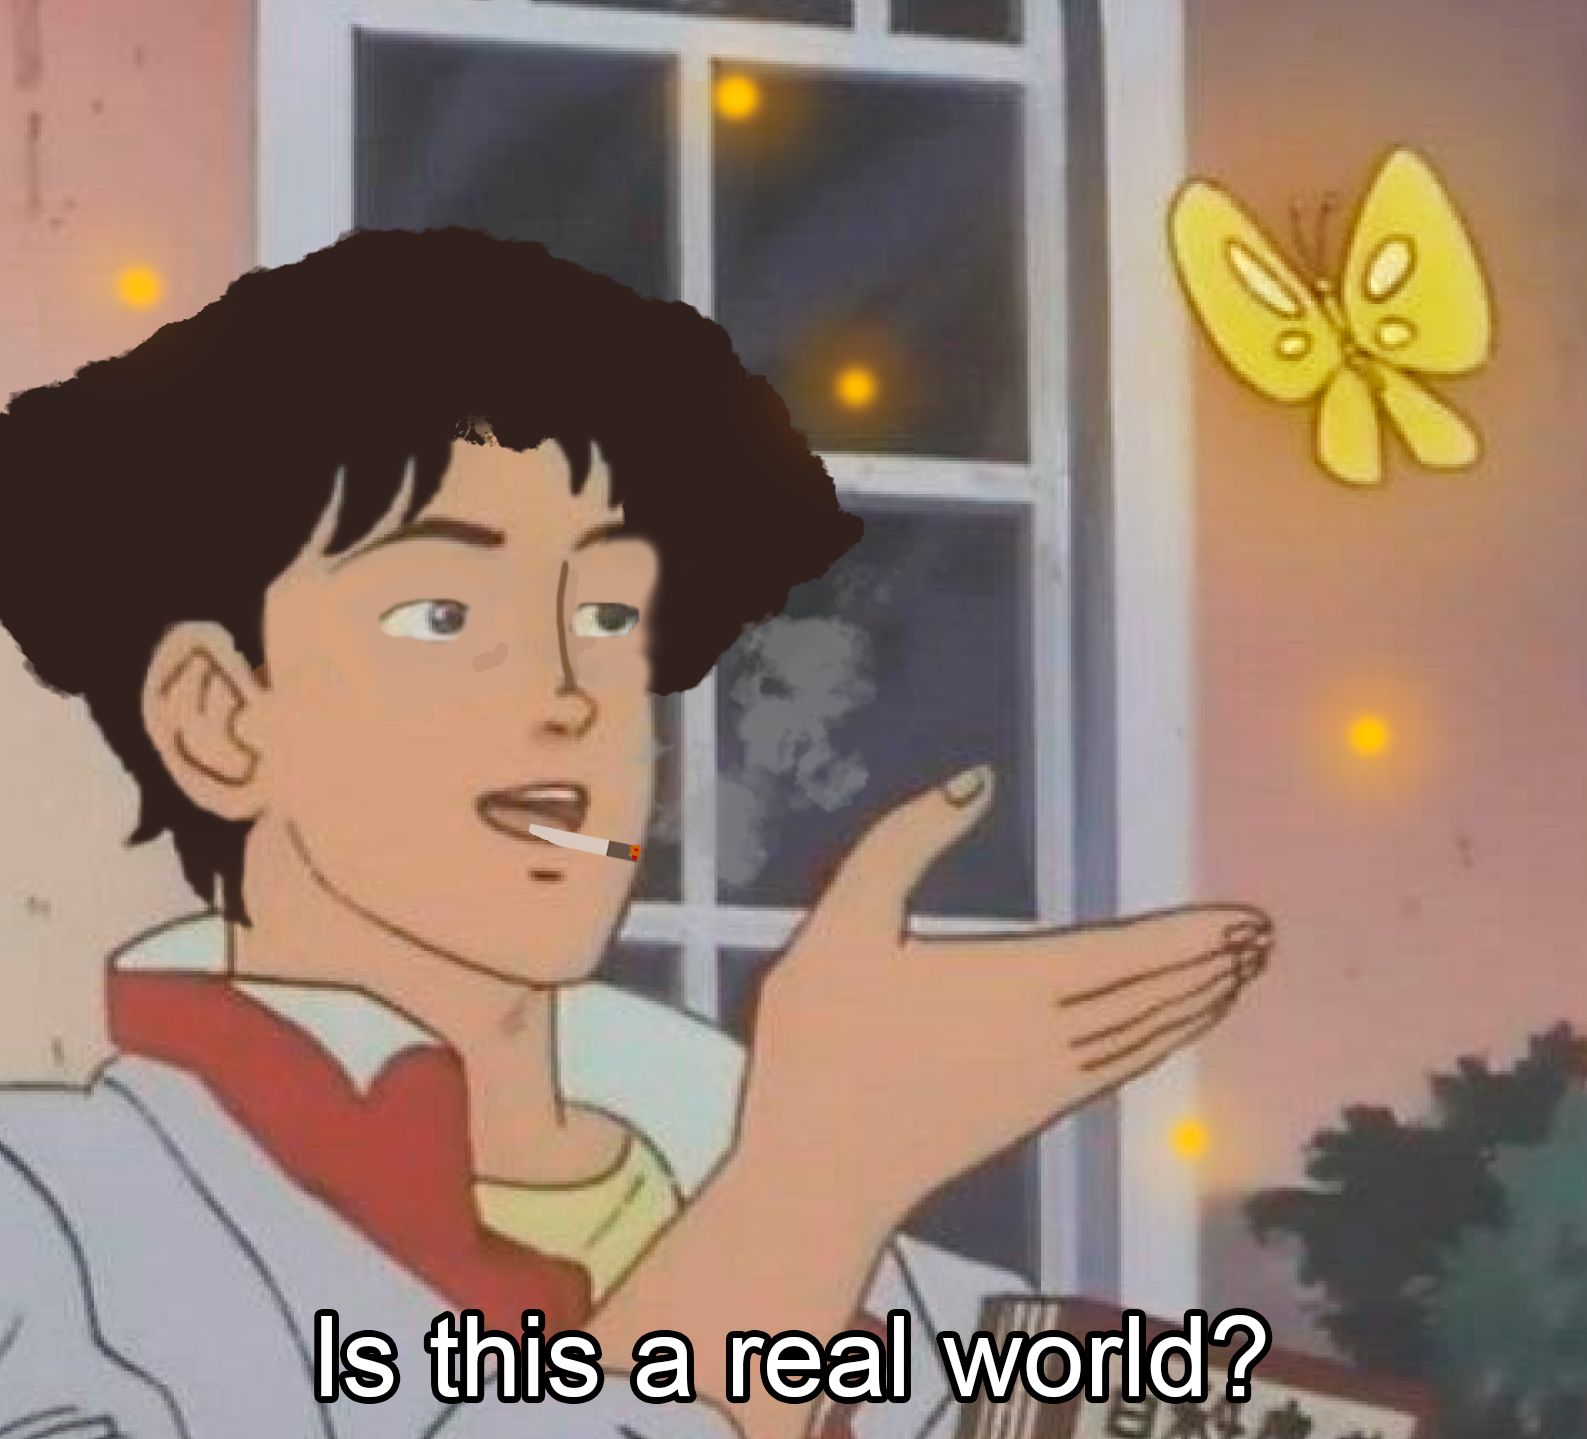 A &quot;Is this a&quot; meme with a Cowboy Bebop theme where the subject says &quot;Is this a real world?&quot;